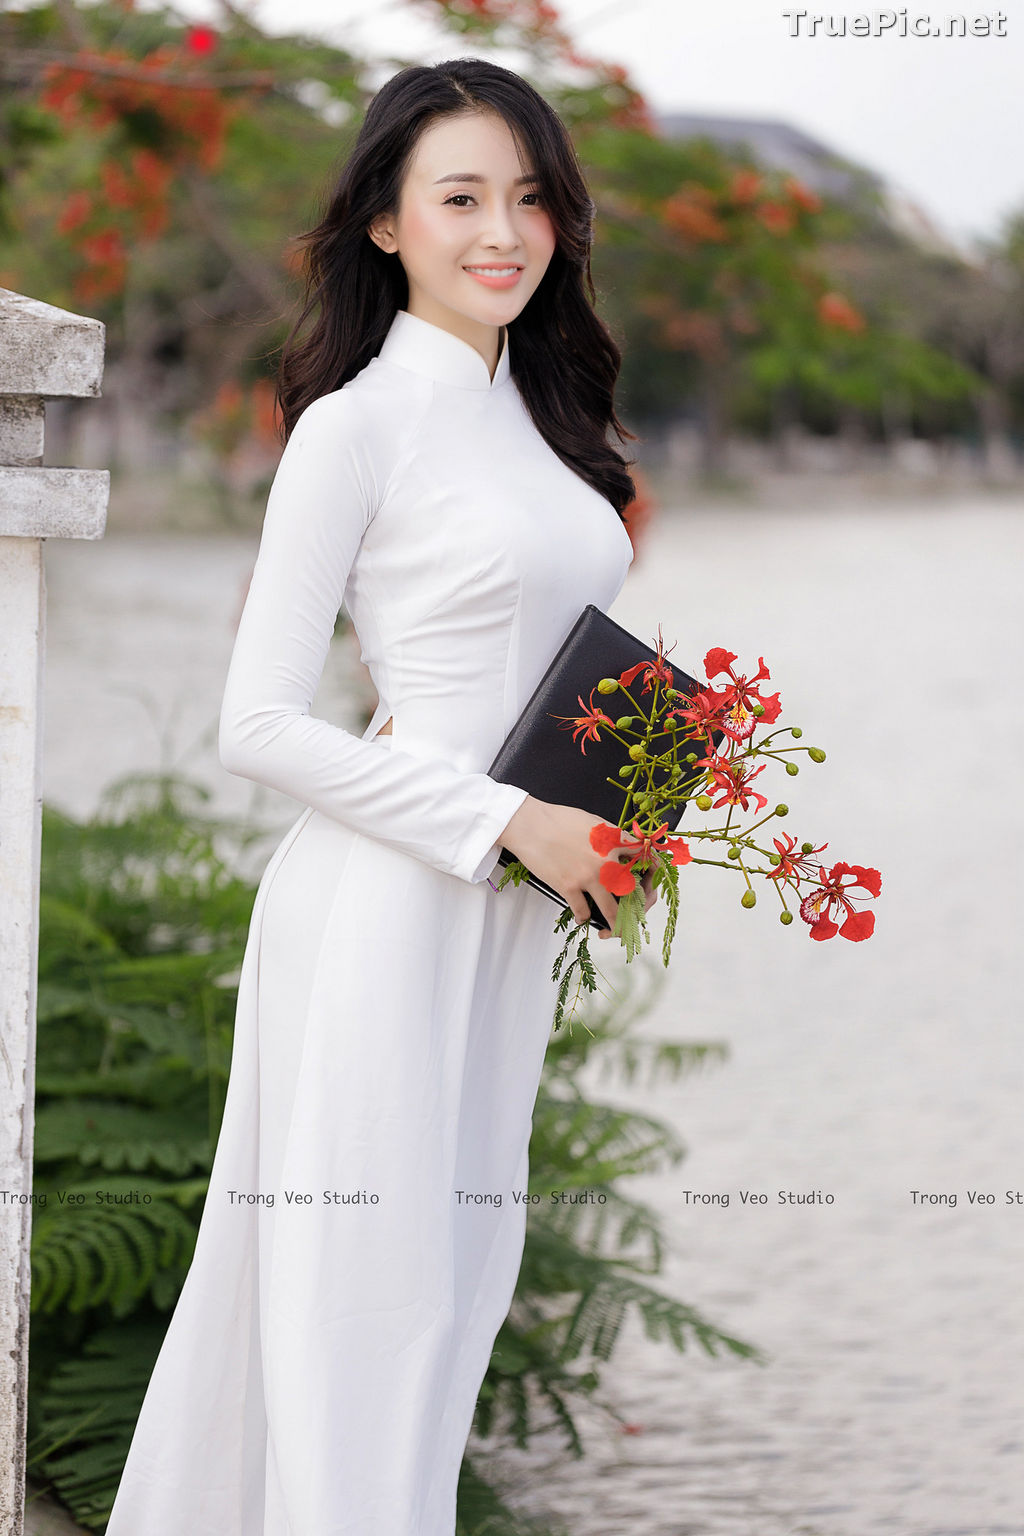 Image The Beauty of Vietnamese Girls with Traditional Dress (Ao Dai) #3 - TruePic.net - Picture-36